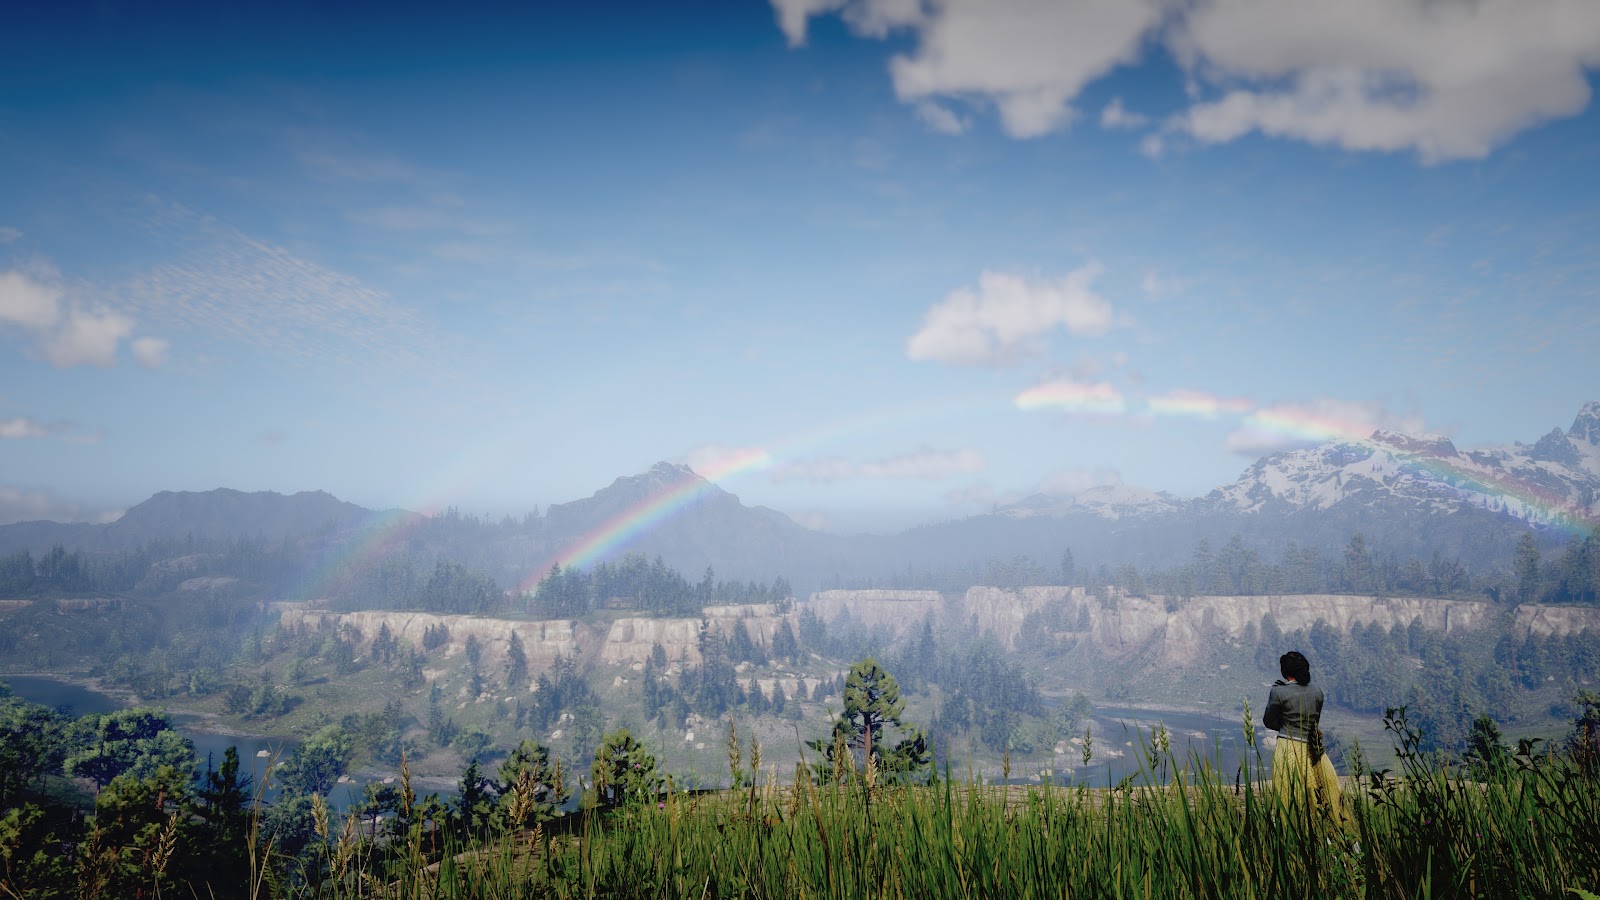 Tilly, standing at a cliff, looking out at the mountains with a double rainbow over them.